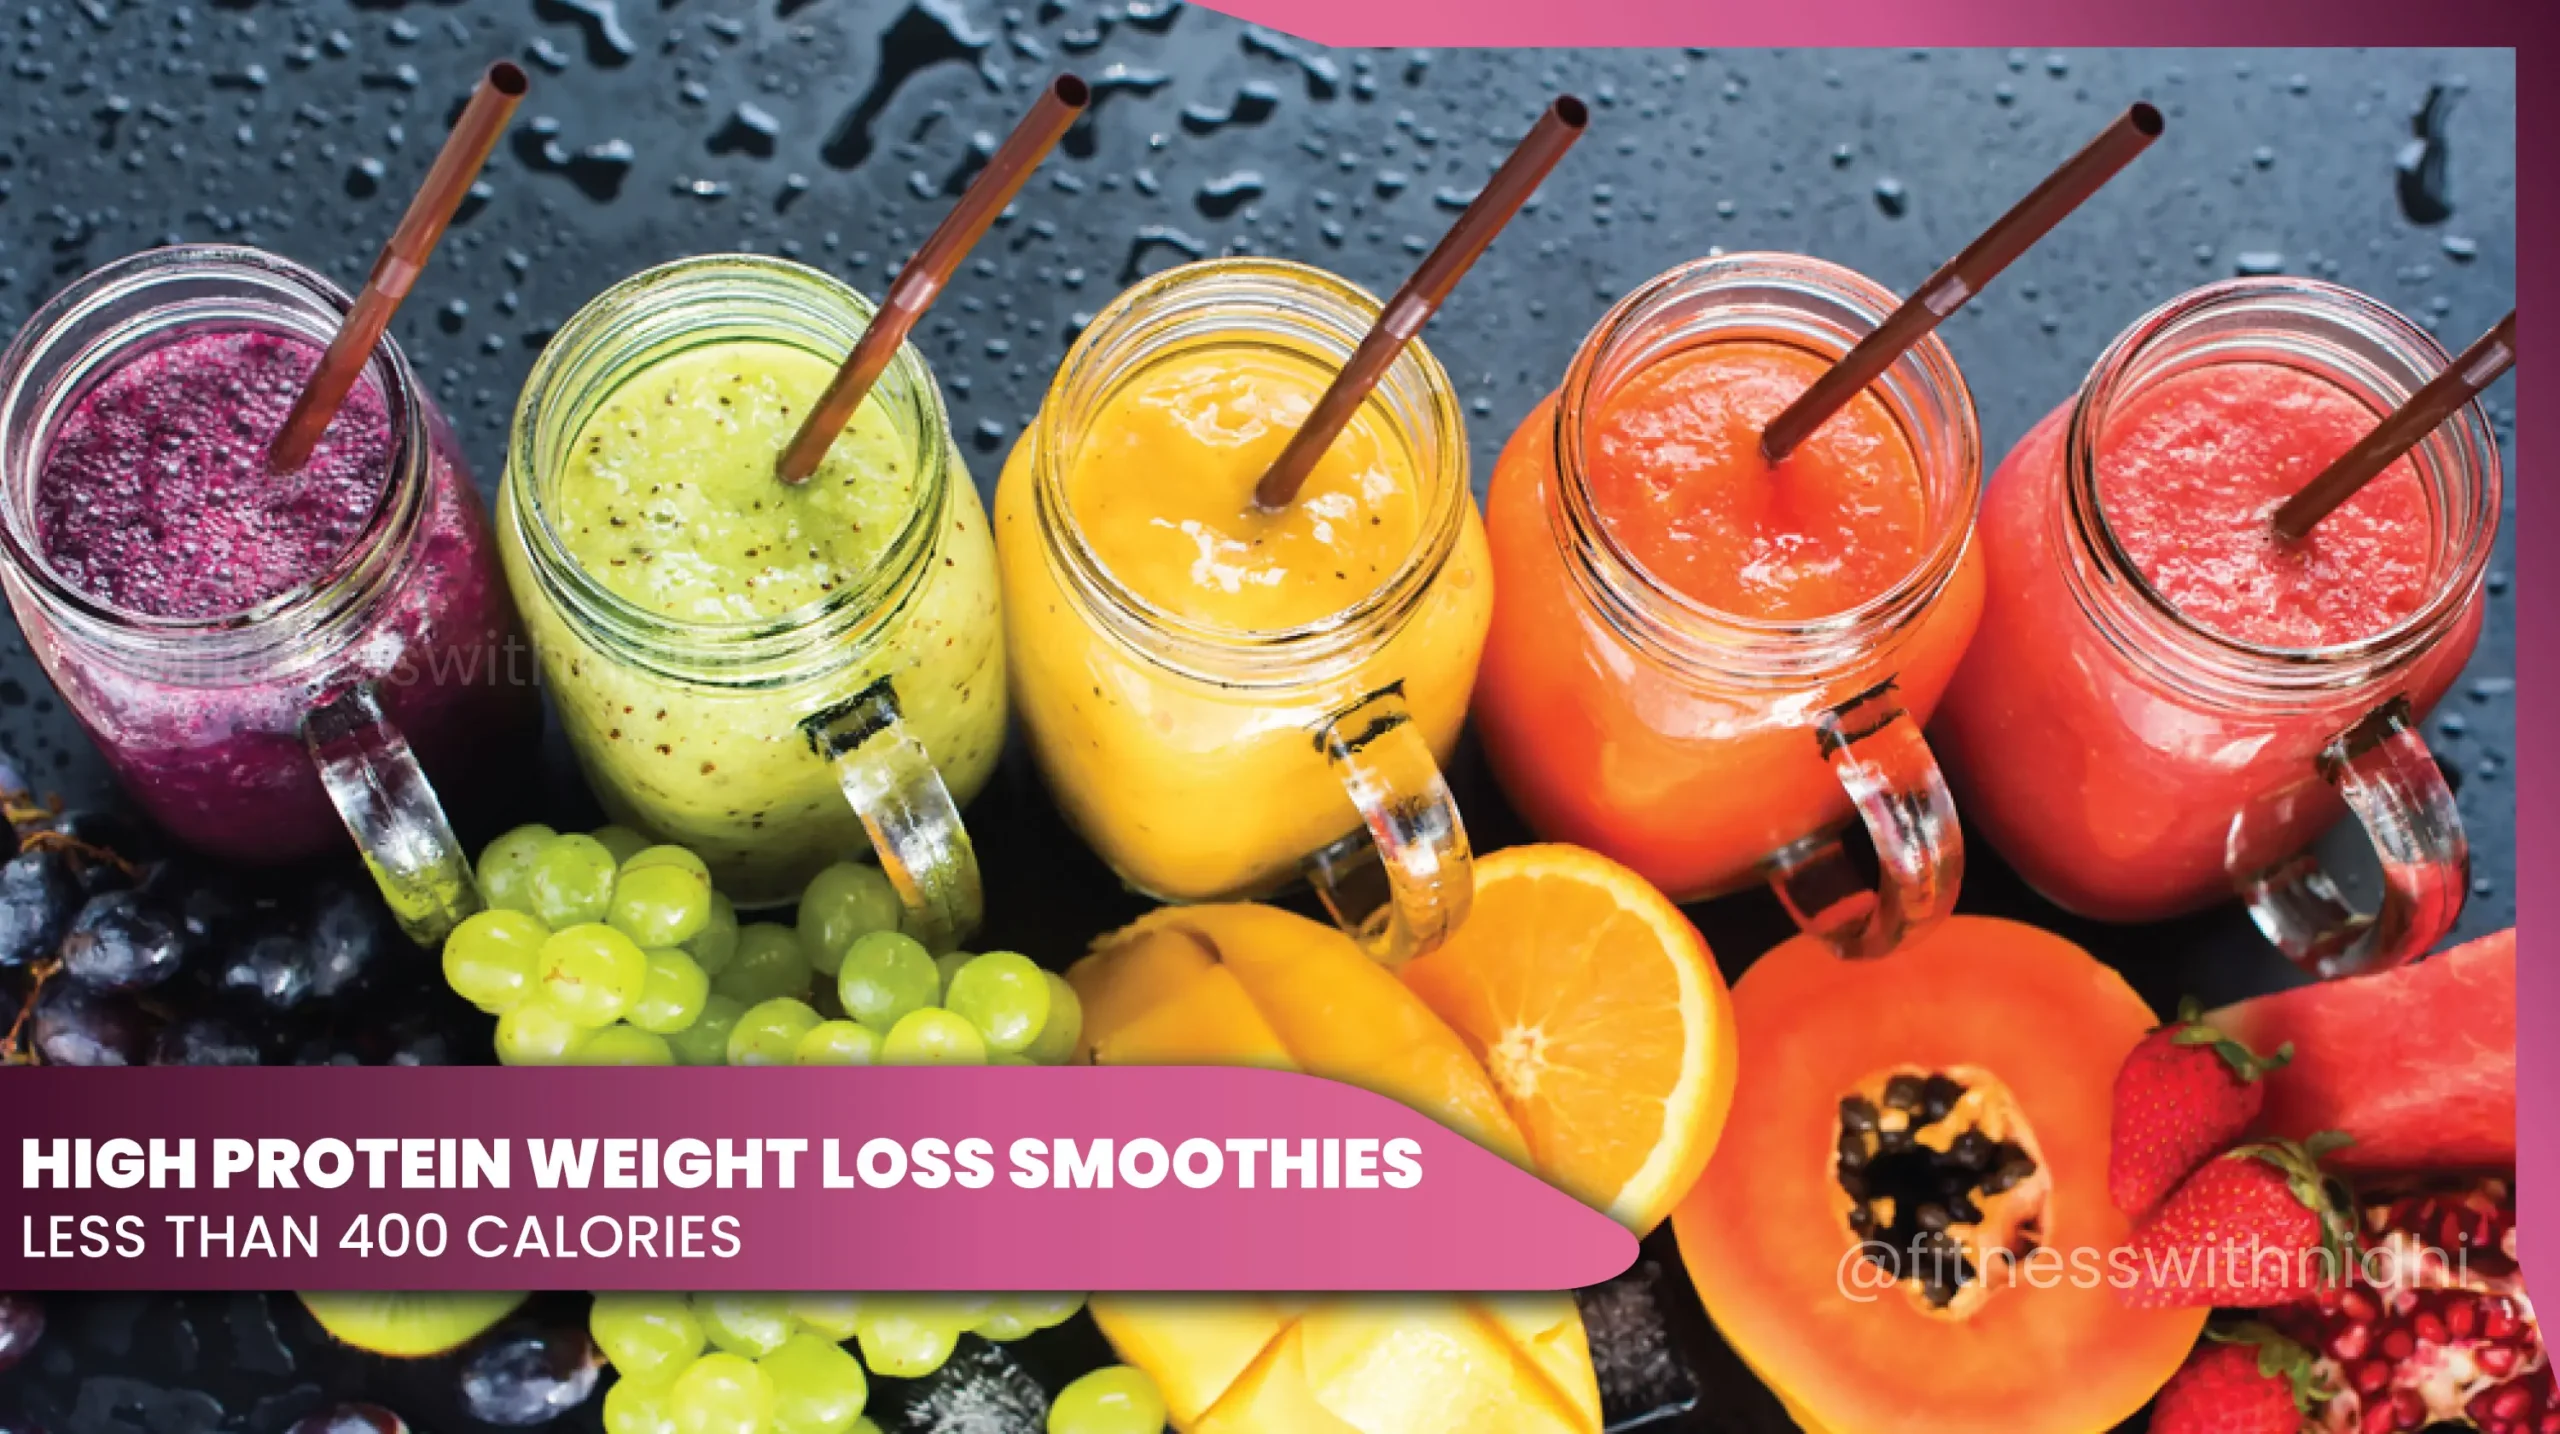 11High Protein Weight Loss Smoothies Under 400 Calories